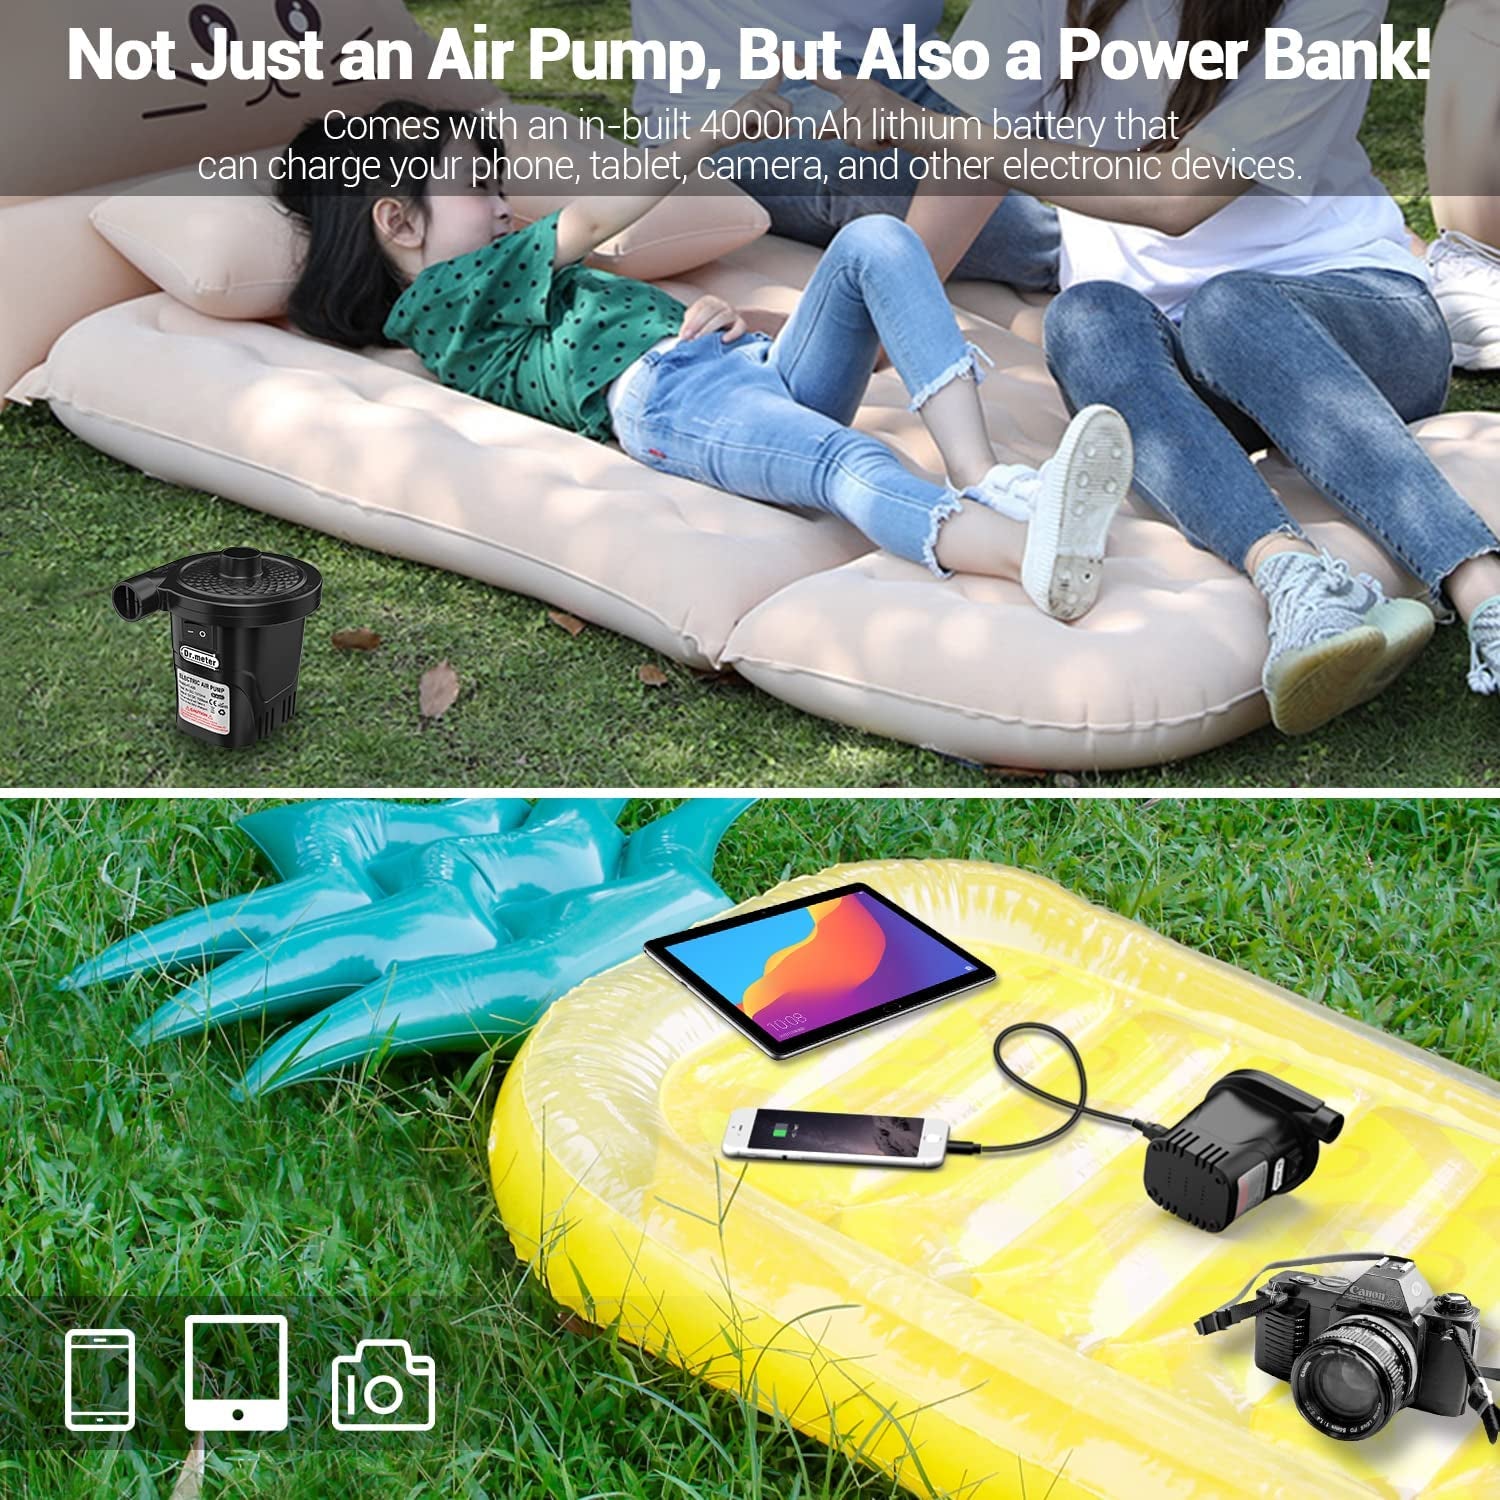 Electric Air Pump for Inflatables: Rechargeable 4000Mah Battery Air Mattress Pump -  Portable Quick-Fill Inflator Deflator for Outdoor Camping Bed Pool Boat Float Raft Yoga Balls Snow Tube